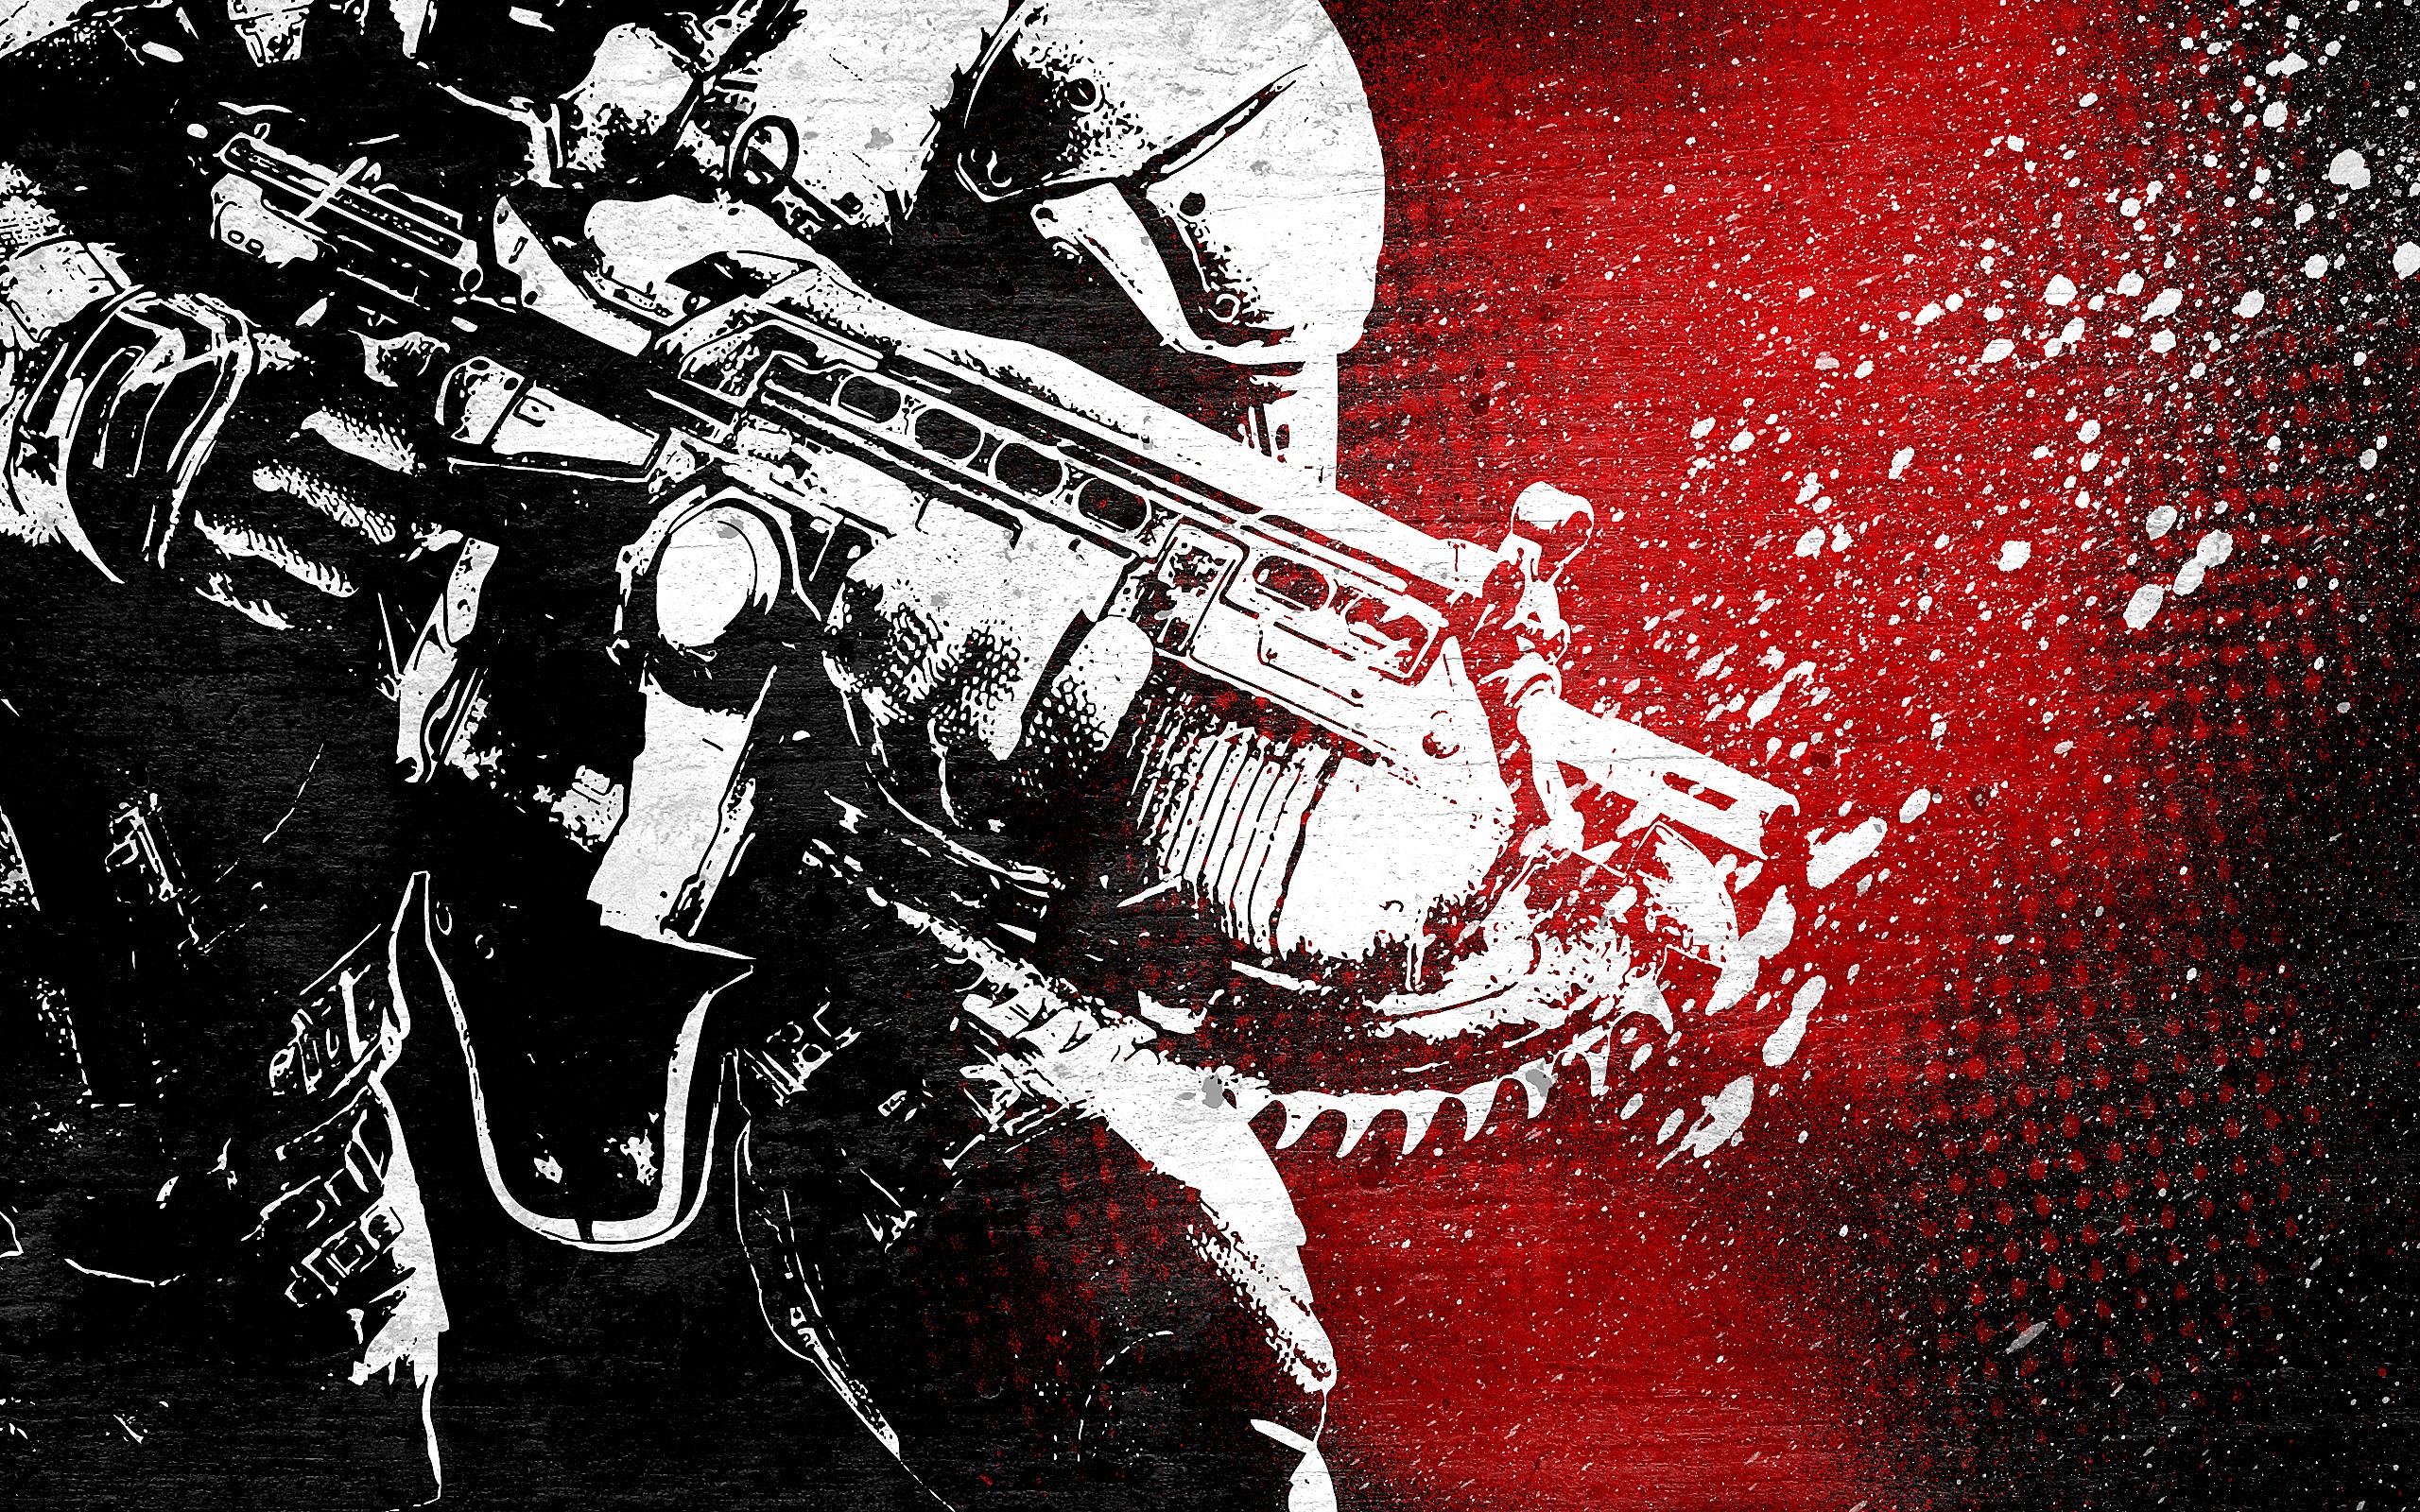 General 2560x1600 video games Gears of War video game art video game characters